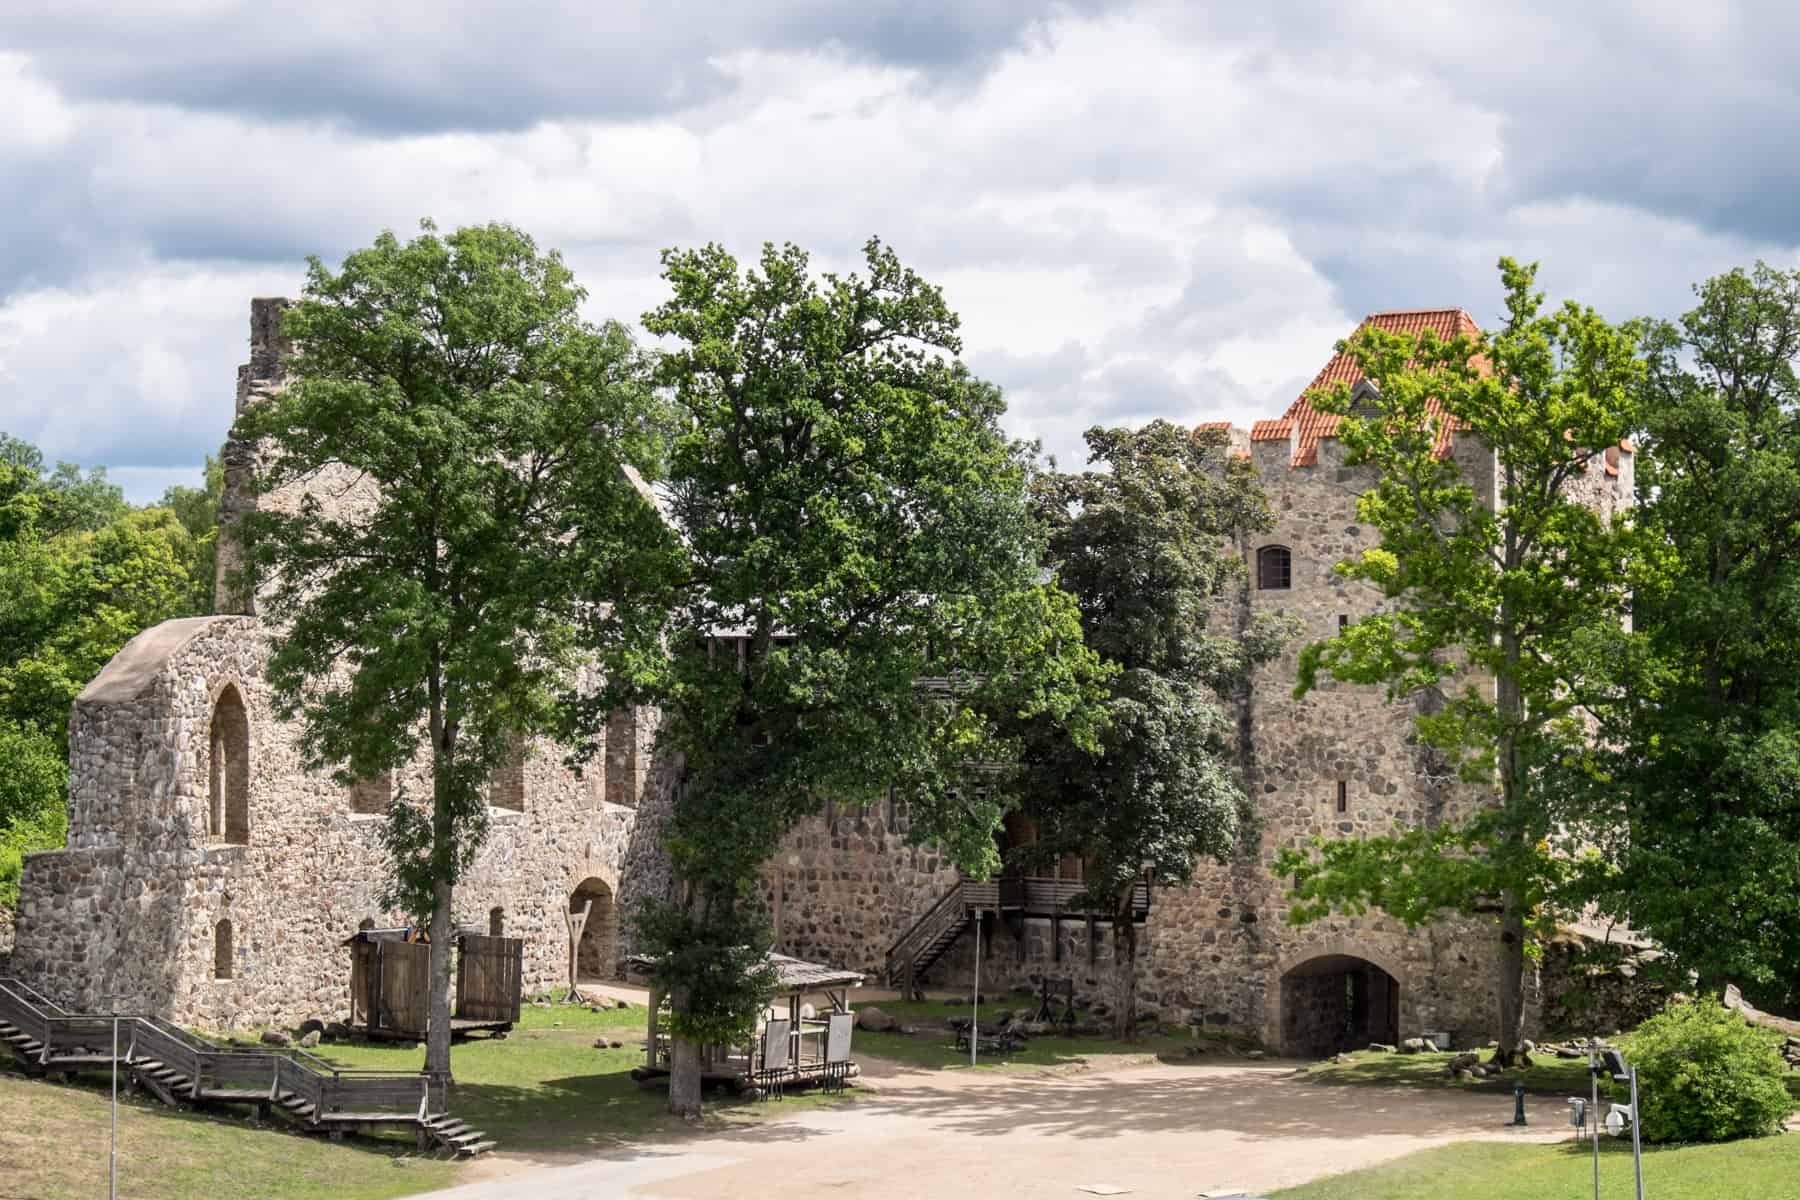 The beige ruins of a Latvian medieval castle with an orange roof can be seen behind five trees